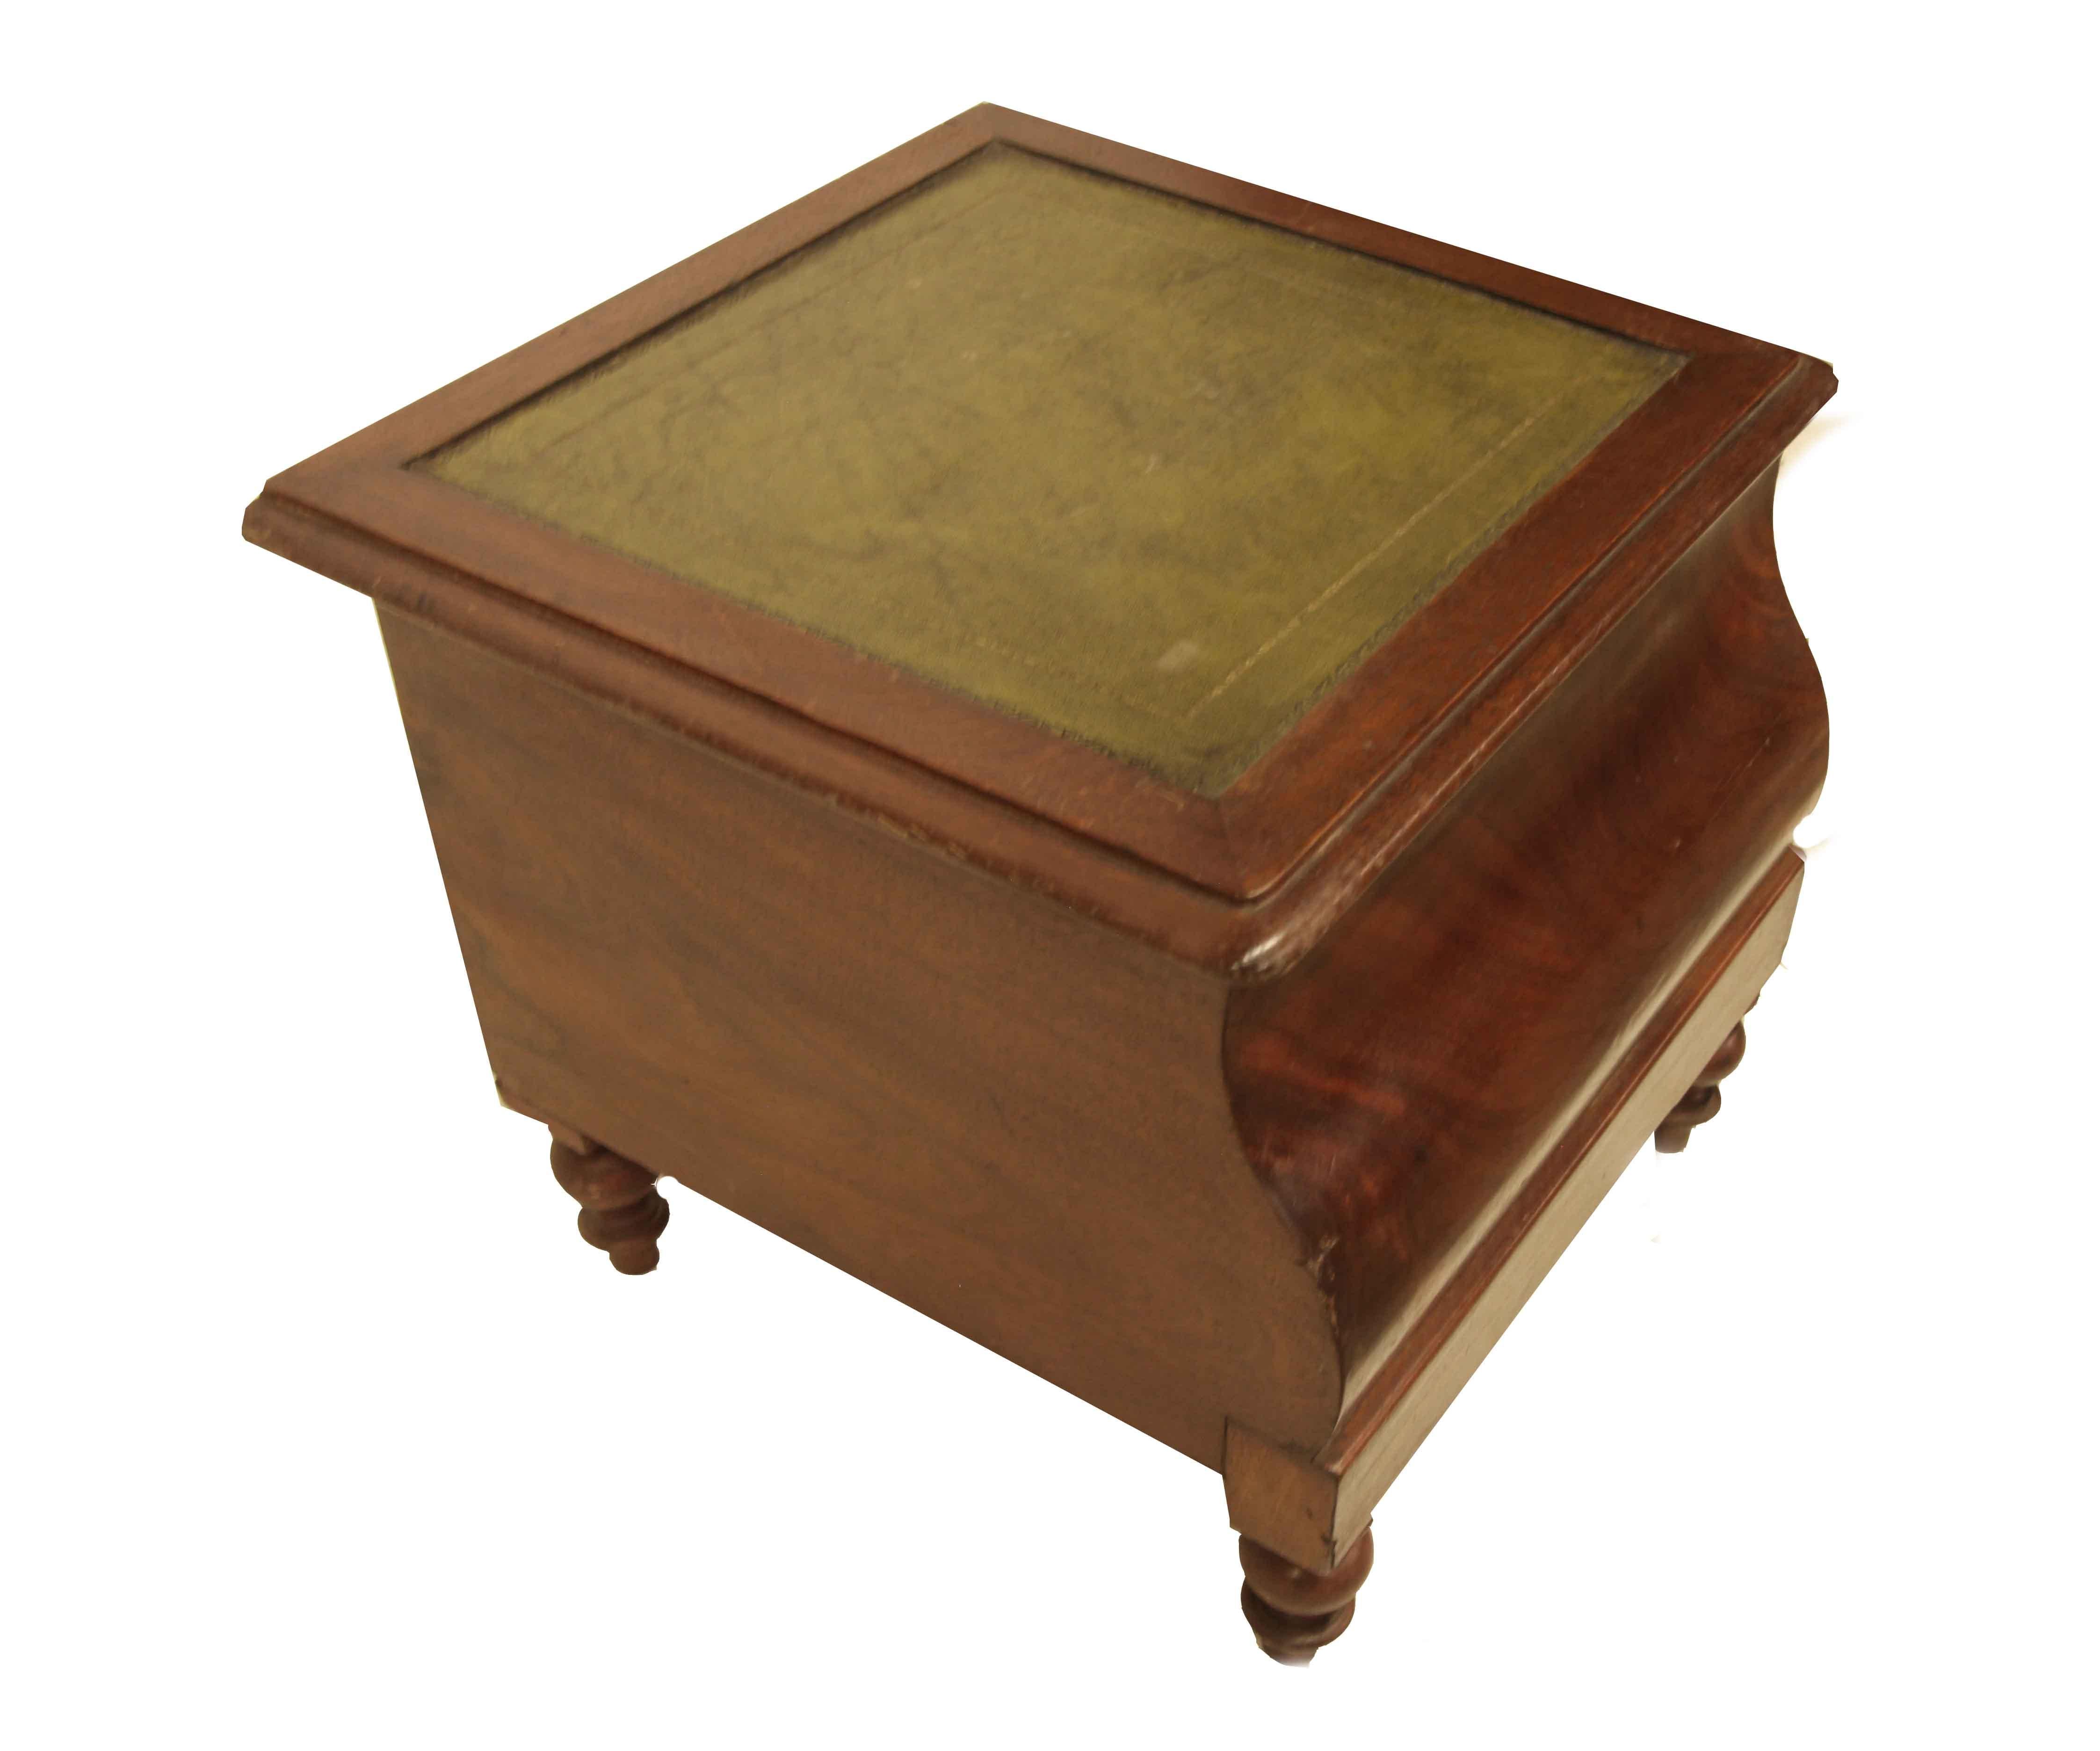 Victorian mahogany commode,  this piece has been converted from a commode; it can serve as a small side stand or stool. It has a tooled leather insert on the top (not original) surrounded by a band of mahogany that lifts to reveal a fitted lift out